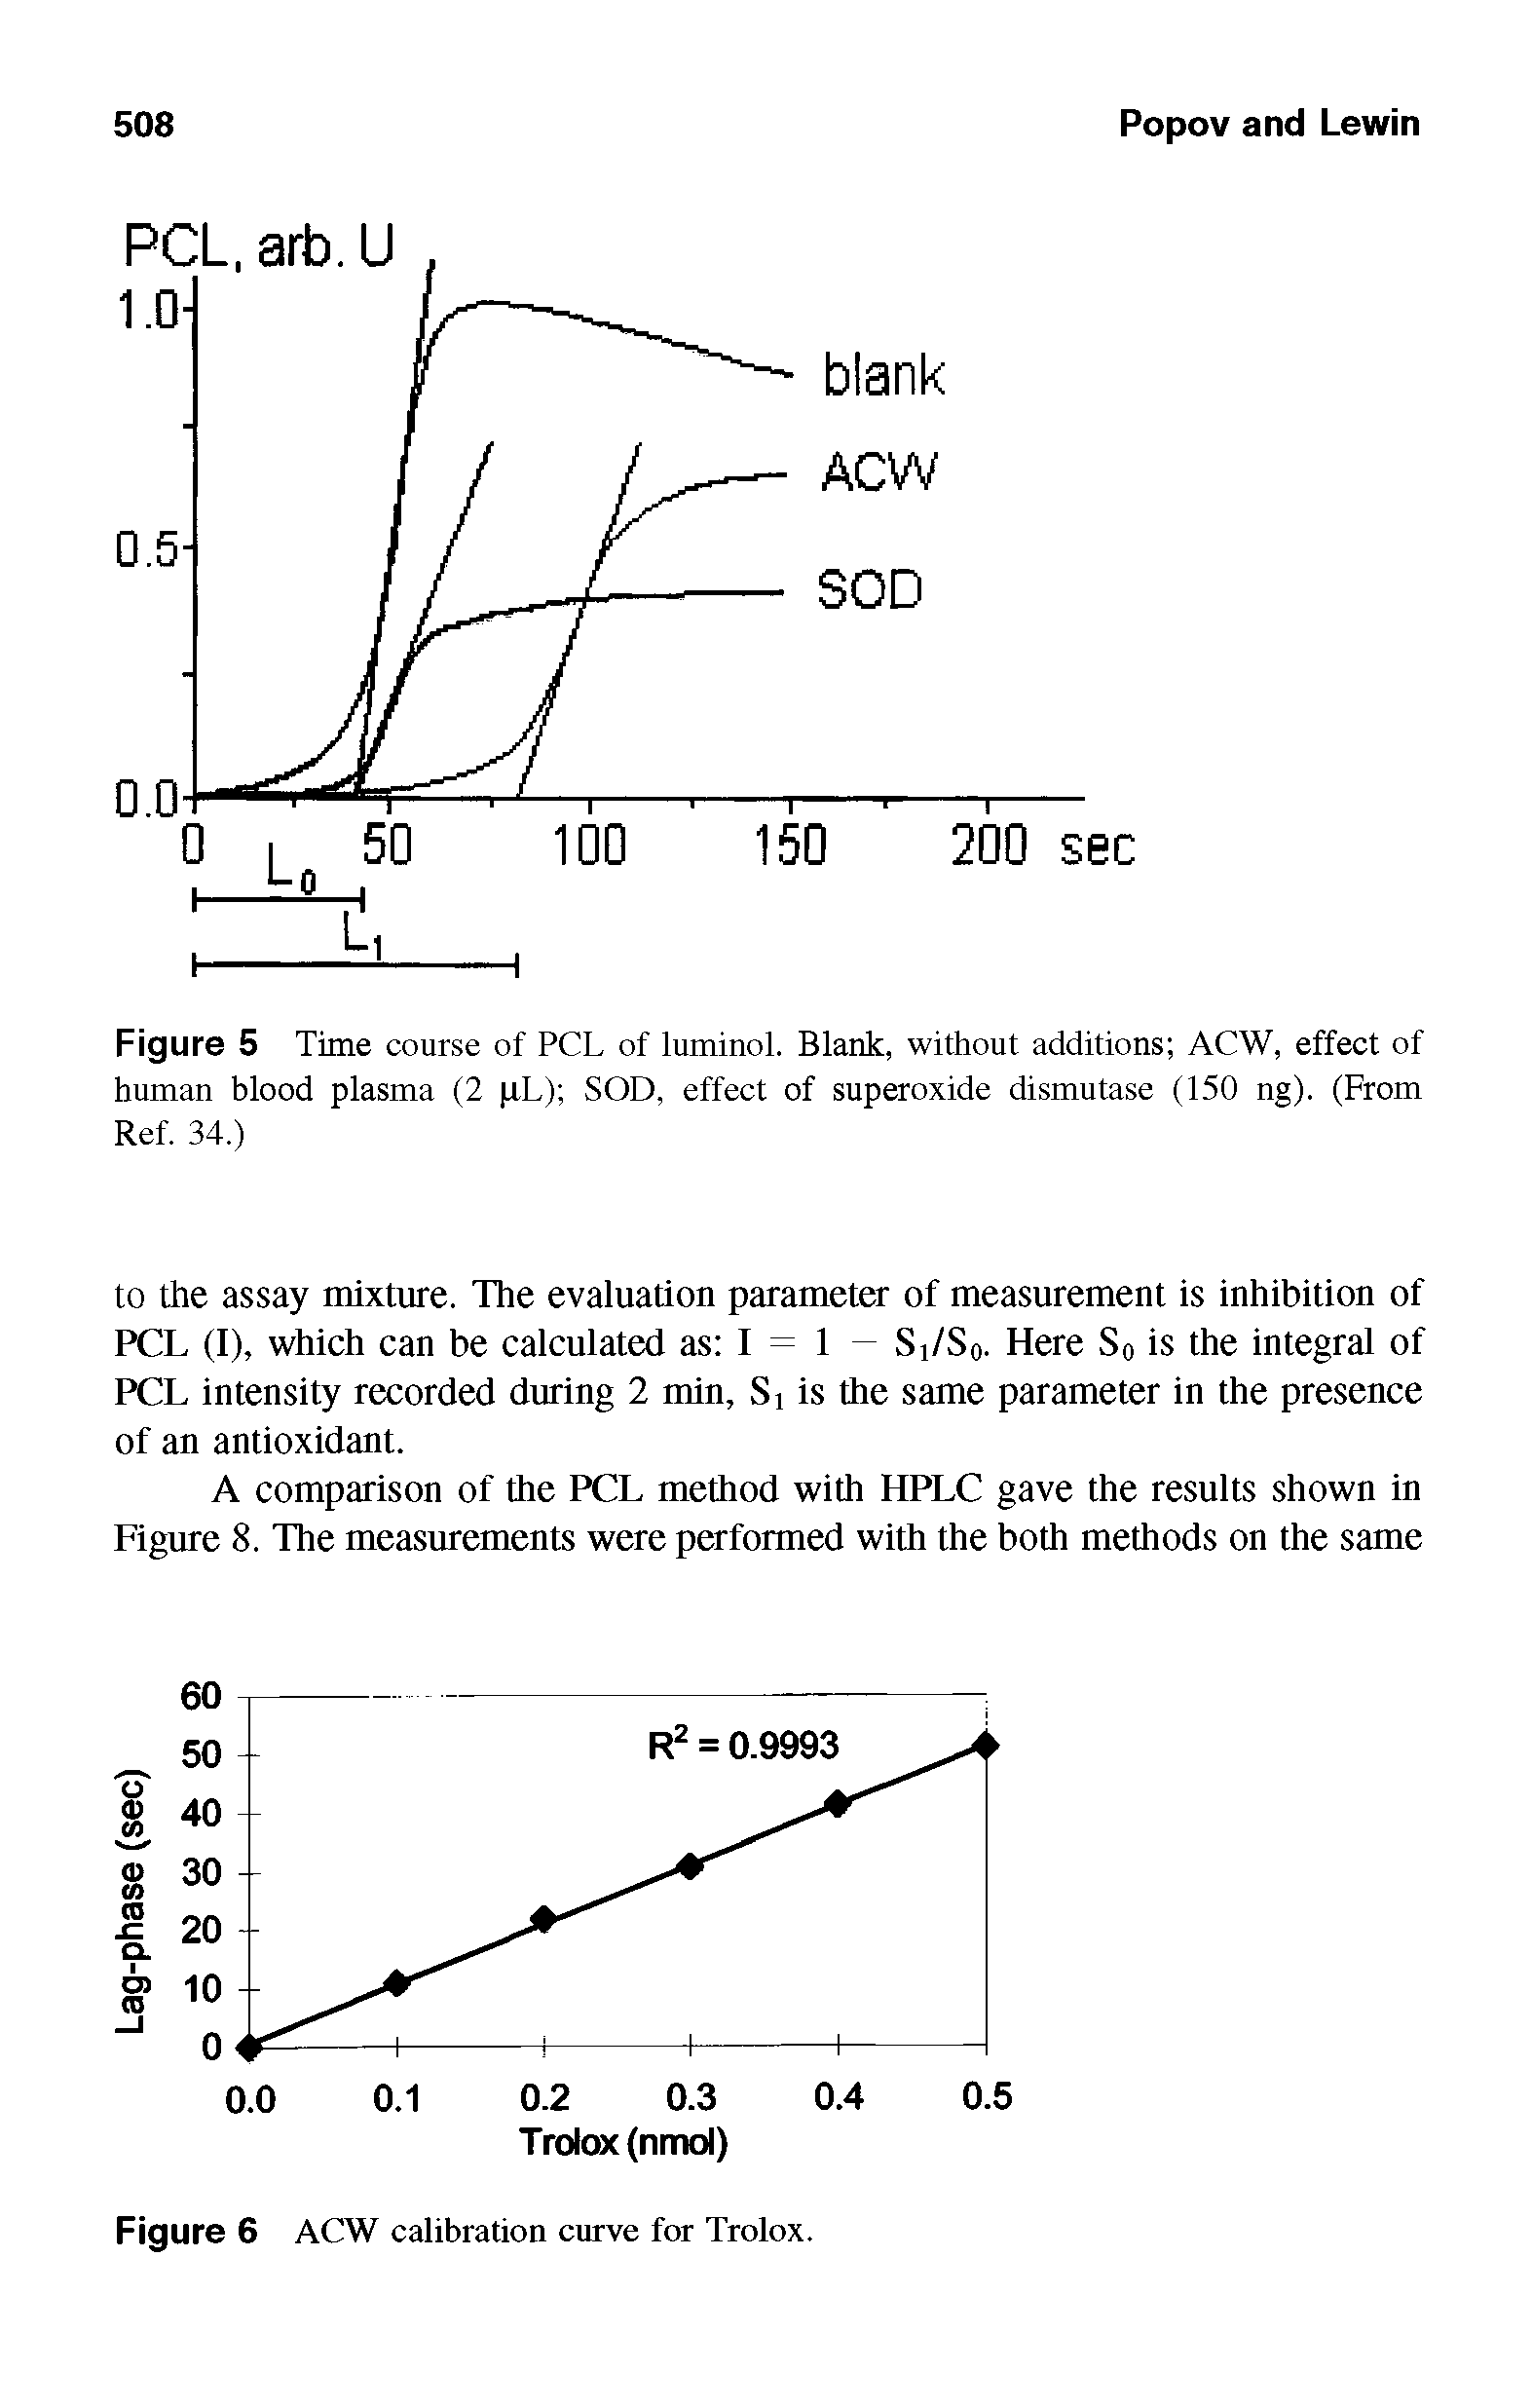 Figure 5 Time course of PCL of luminol. Blank, without additions ACW, effect of human blood plasma (2 pL) SOD, effect of superoxide dismutase (150 ng). (From Ref. 34.)...